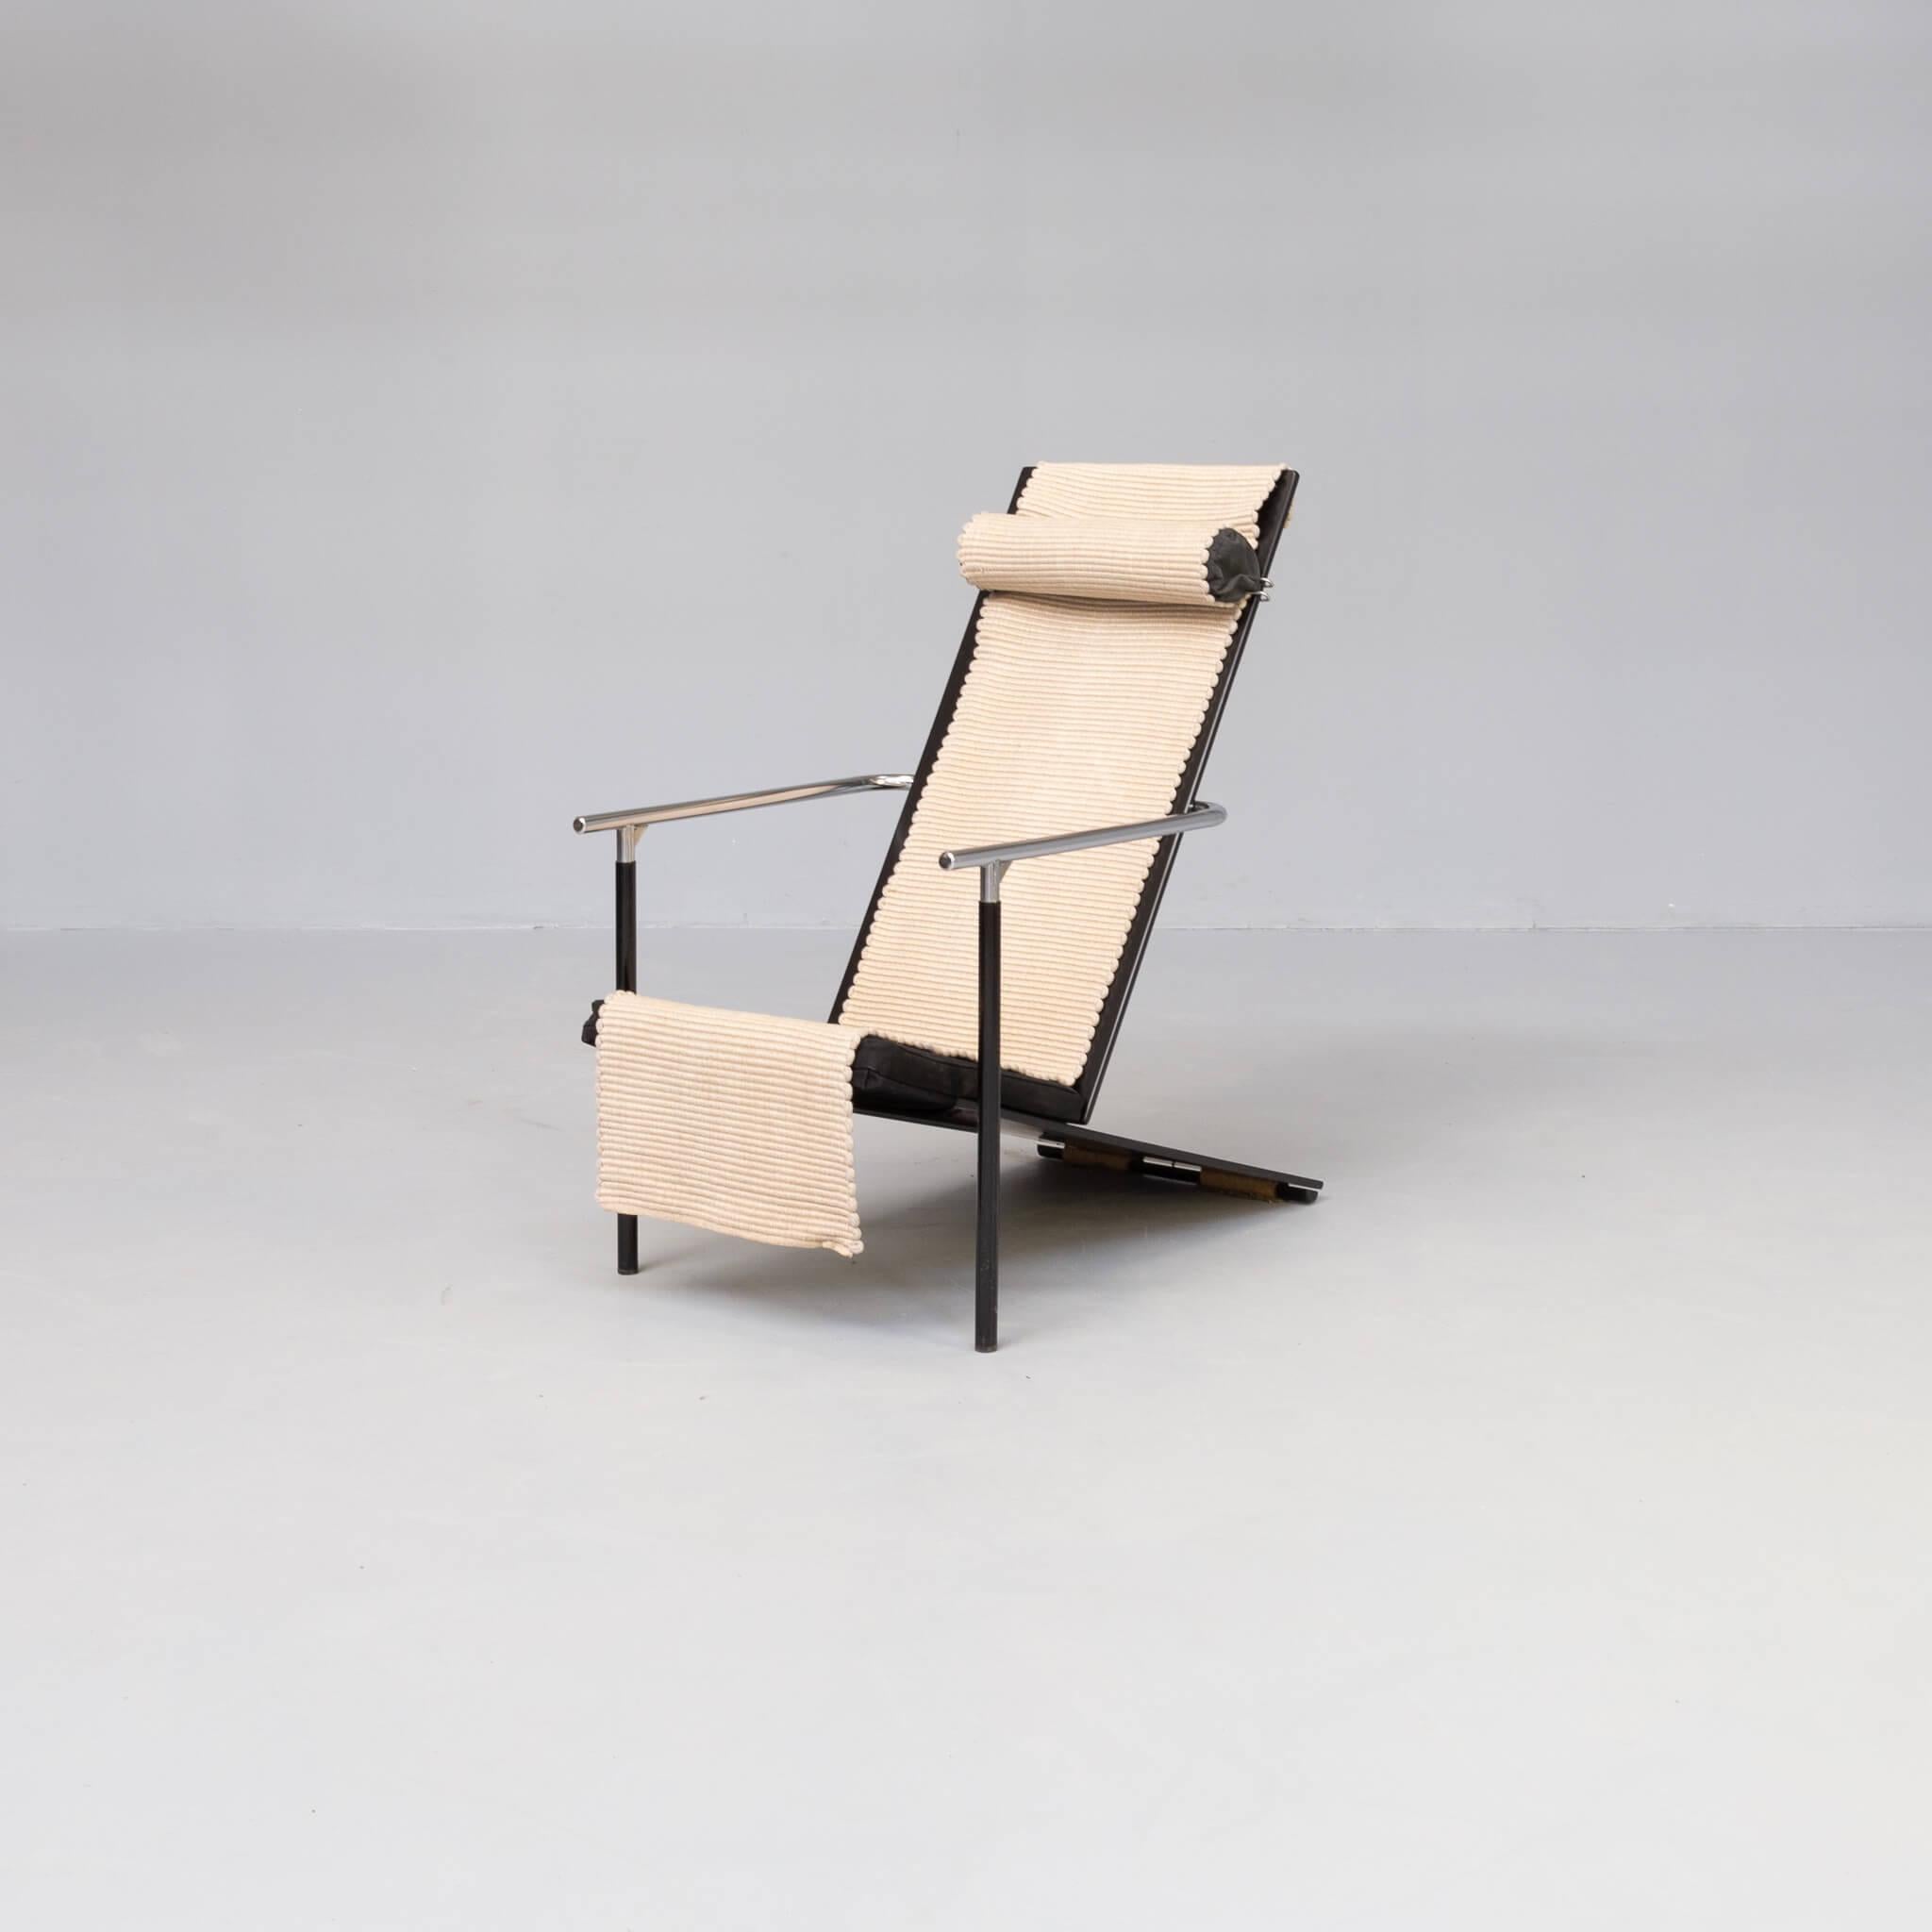 The Inna armchair designed in 1982 by student designer Pentti Hakala. Produced by Inno-tuote Oy, Finland. This Minimalist chair was designed to be assembled by the first buyer. The materials are steel and plywood. Sprung casters on the rear of